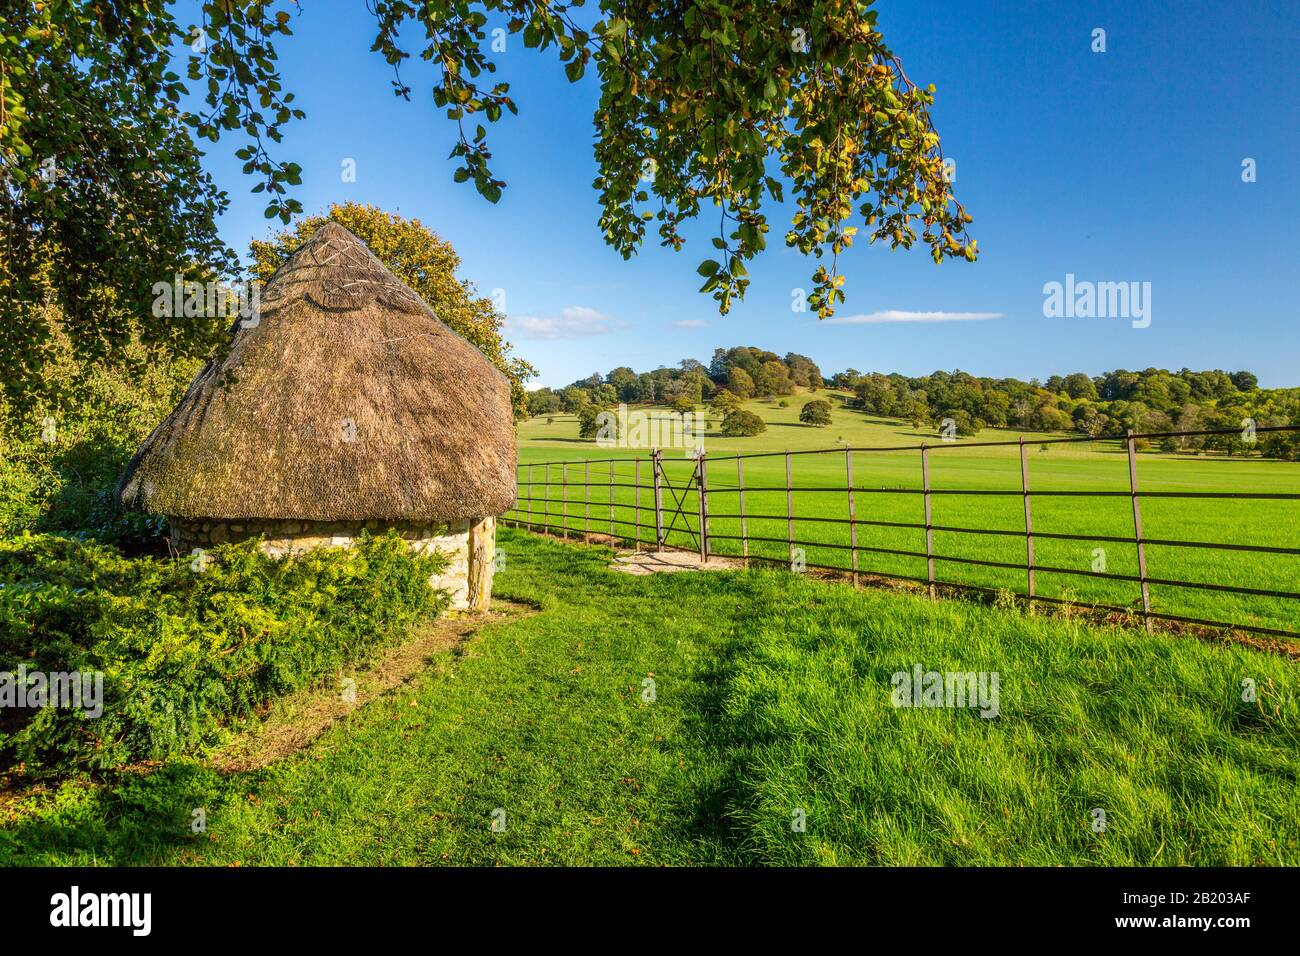 Thatched shelter on part of the large Digby Estate surrounding Sherborne 'New' Castle built by Walter Raleigh in 1594, Sherborne, Dorset, England, UK Stock Photo